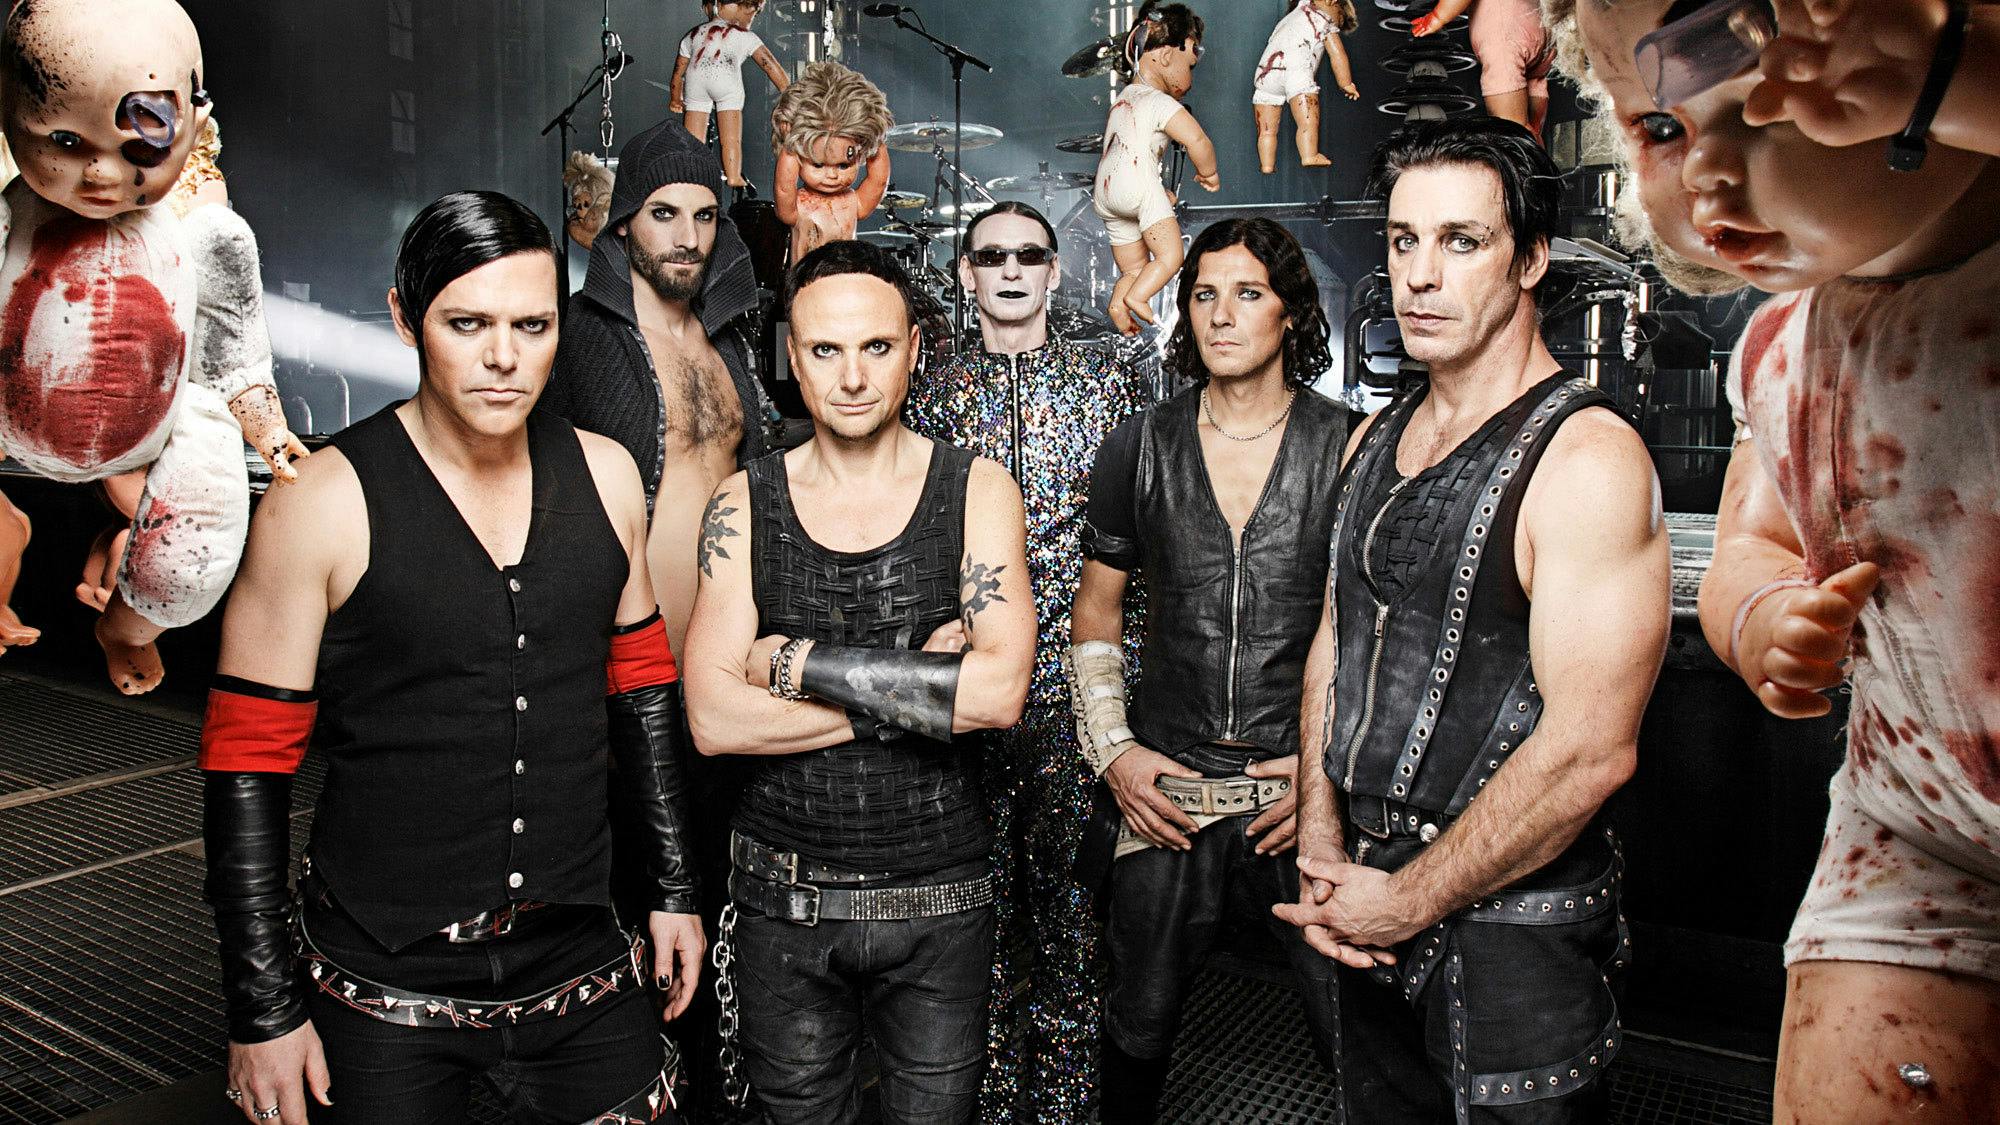 Rammstein have recorded a brand-new album in lockdown